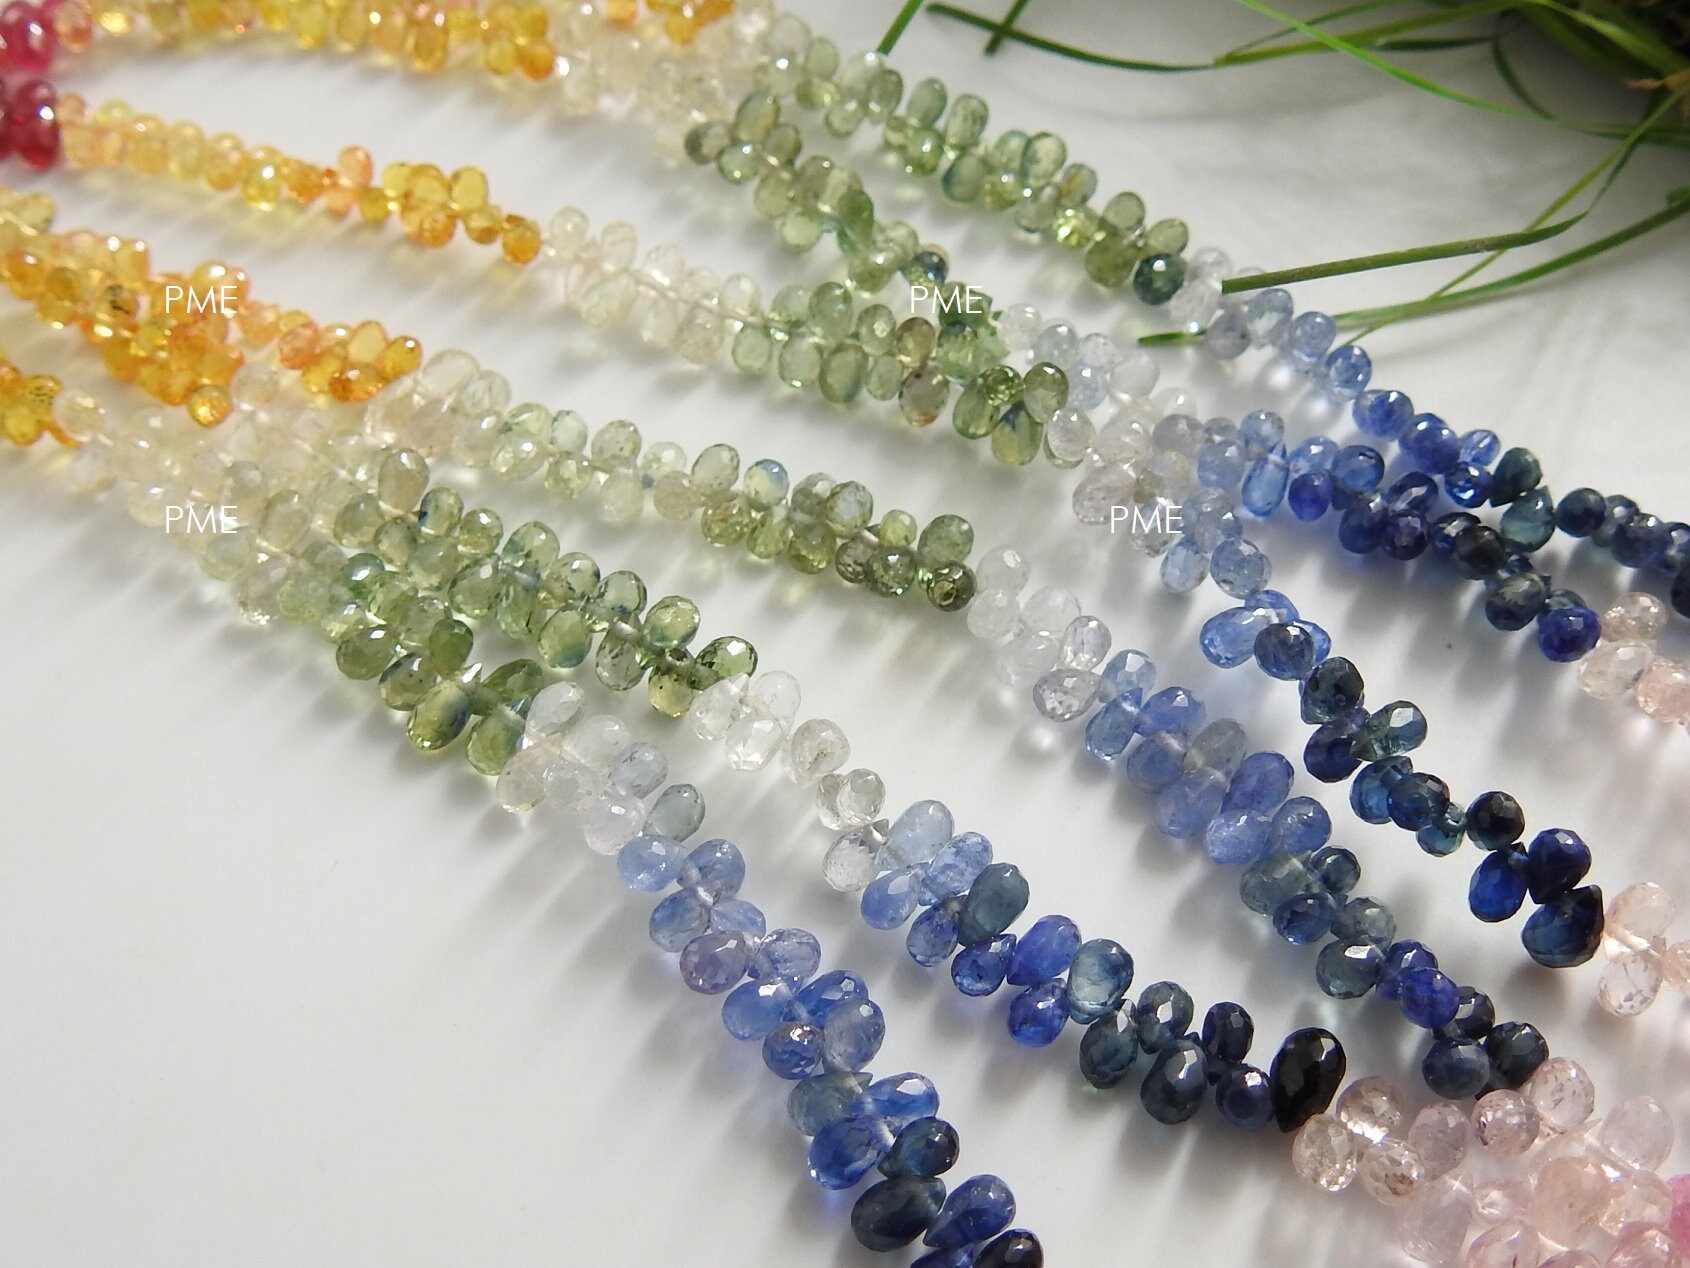 Multi Sapphire Faceted Drop,Teardrop,Loose Bead,Gemstone For Making Jewelry,Precious Stone 100%Natural 8Inch 3-4MM Long Approx PME(BR10) | Save 33% - Rajasthan Living 20